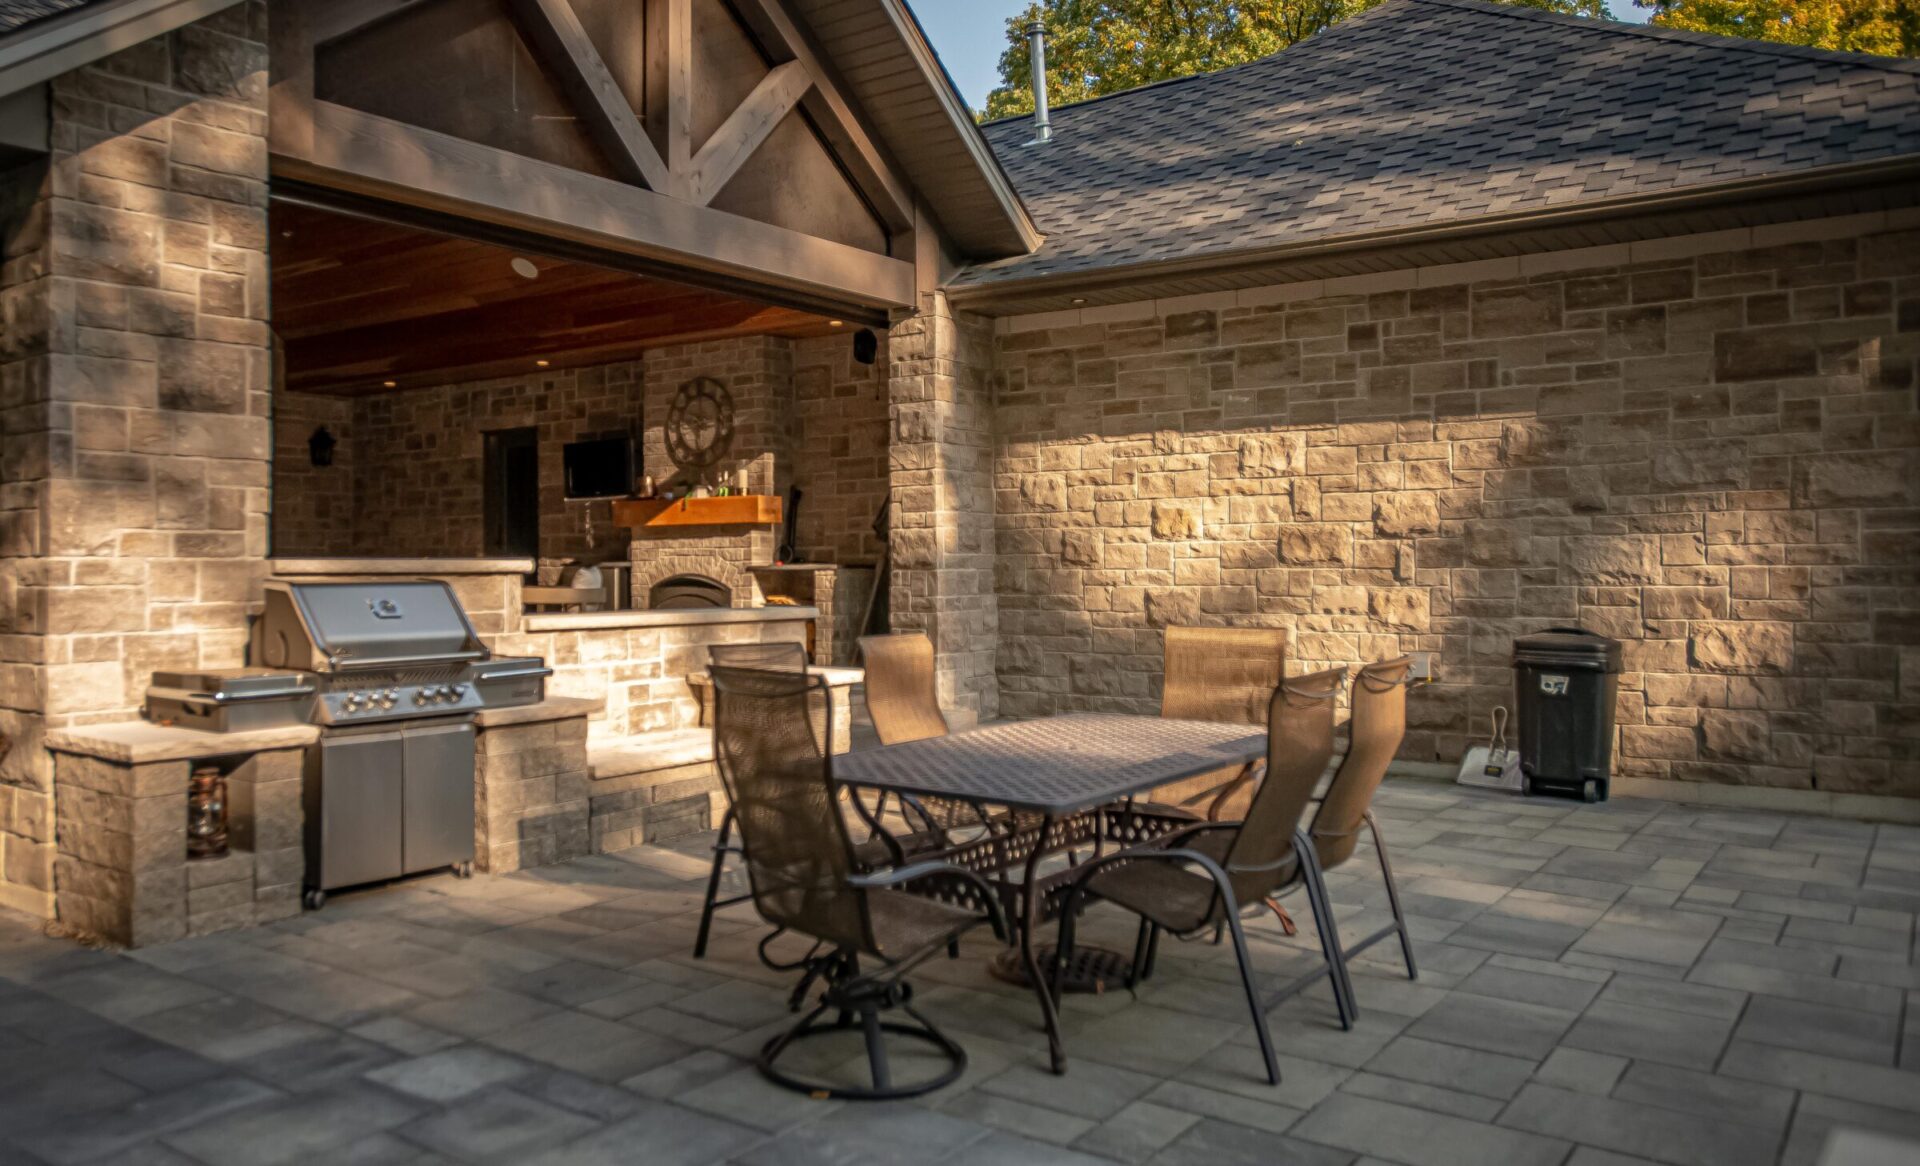 An outdoor patio with stone walls features a dining set, barbecue grill, under a pergola with a wooden ceiling on a sunny day.